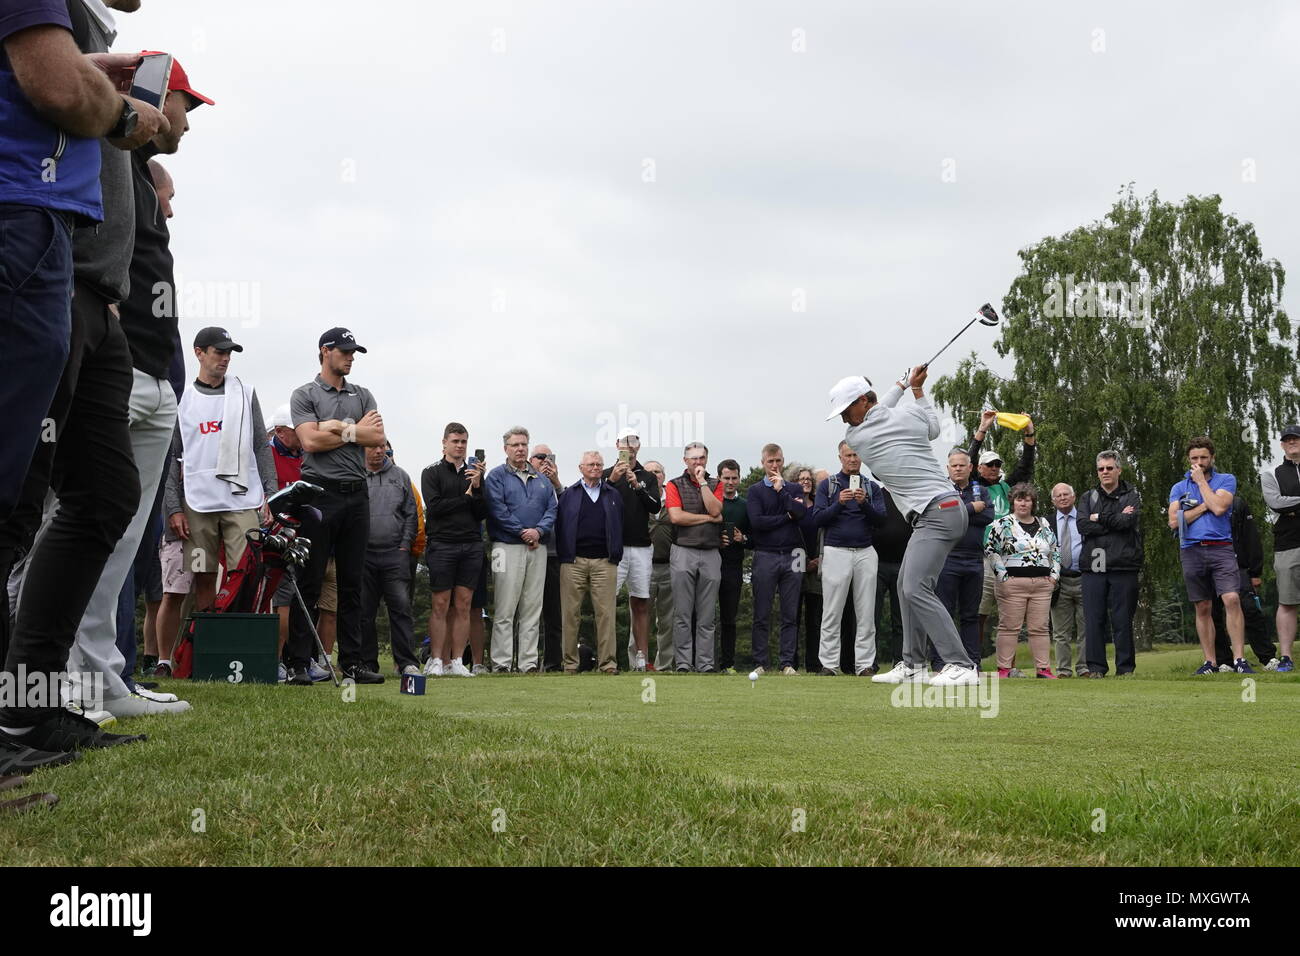 Walton Heath Golf Club, Surrey, UK 4th June 2018 Thorbjorn Olsen on 3rd tee at US Open Golf Championship sectional qualifying for the 2018 US Open to be played at Shinnecock Hills, Long Island, New York, USA in two weeks time. Credit: Motofoto/Alamy Live News Stock Photo